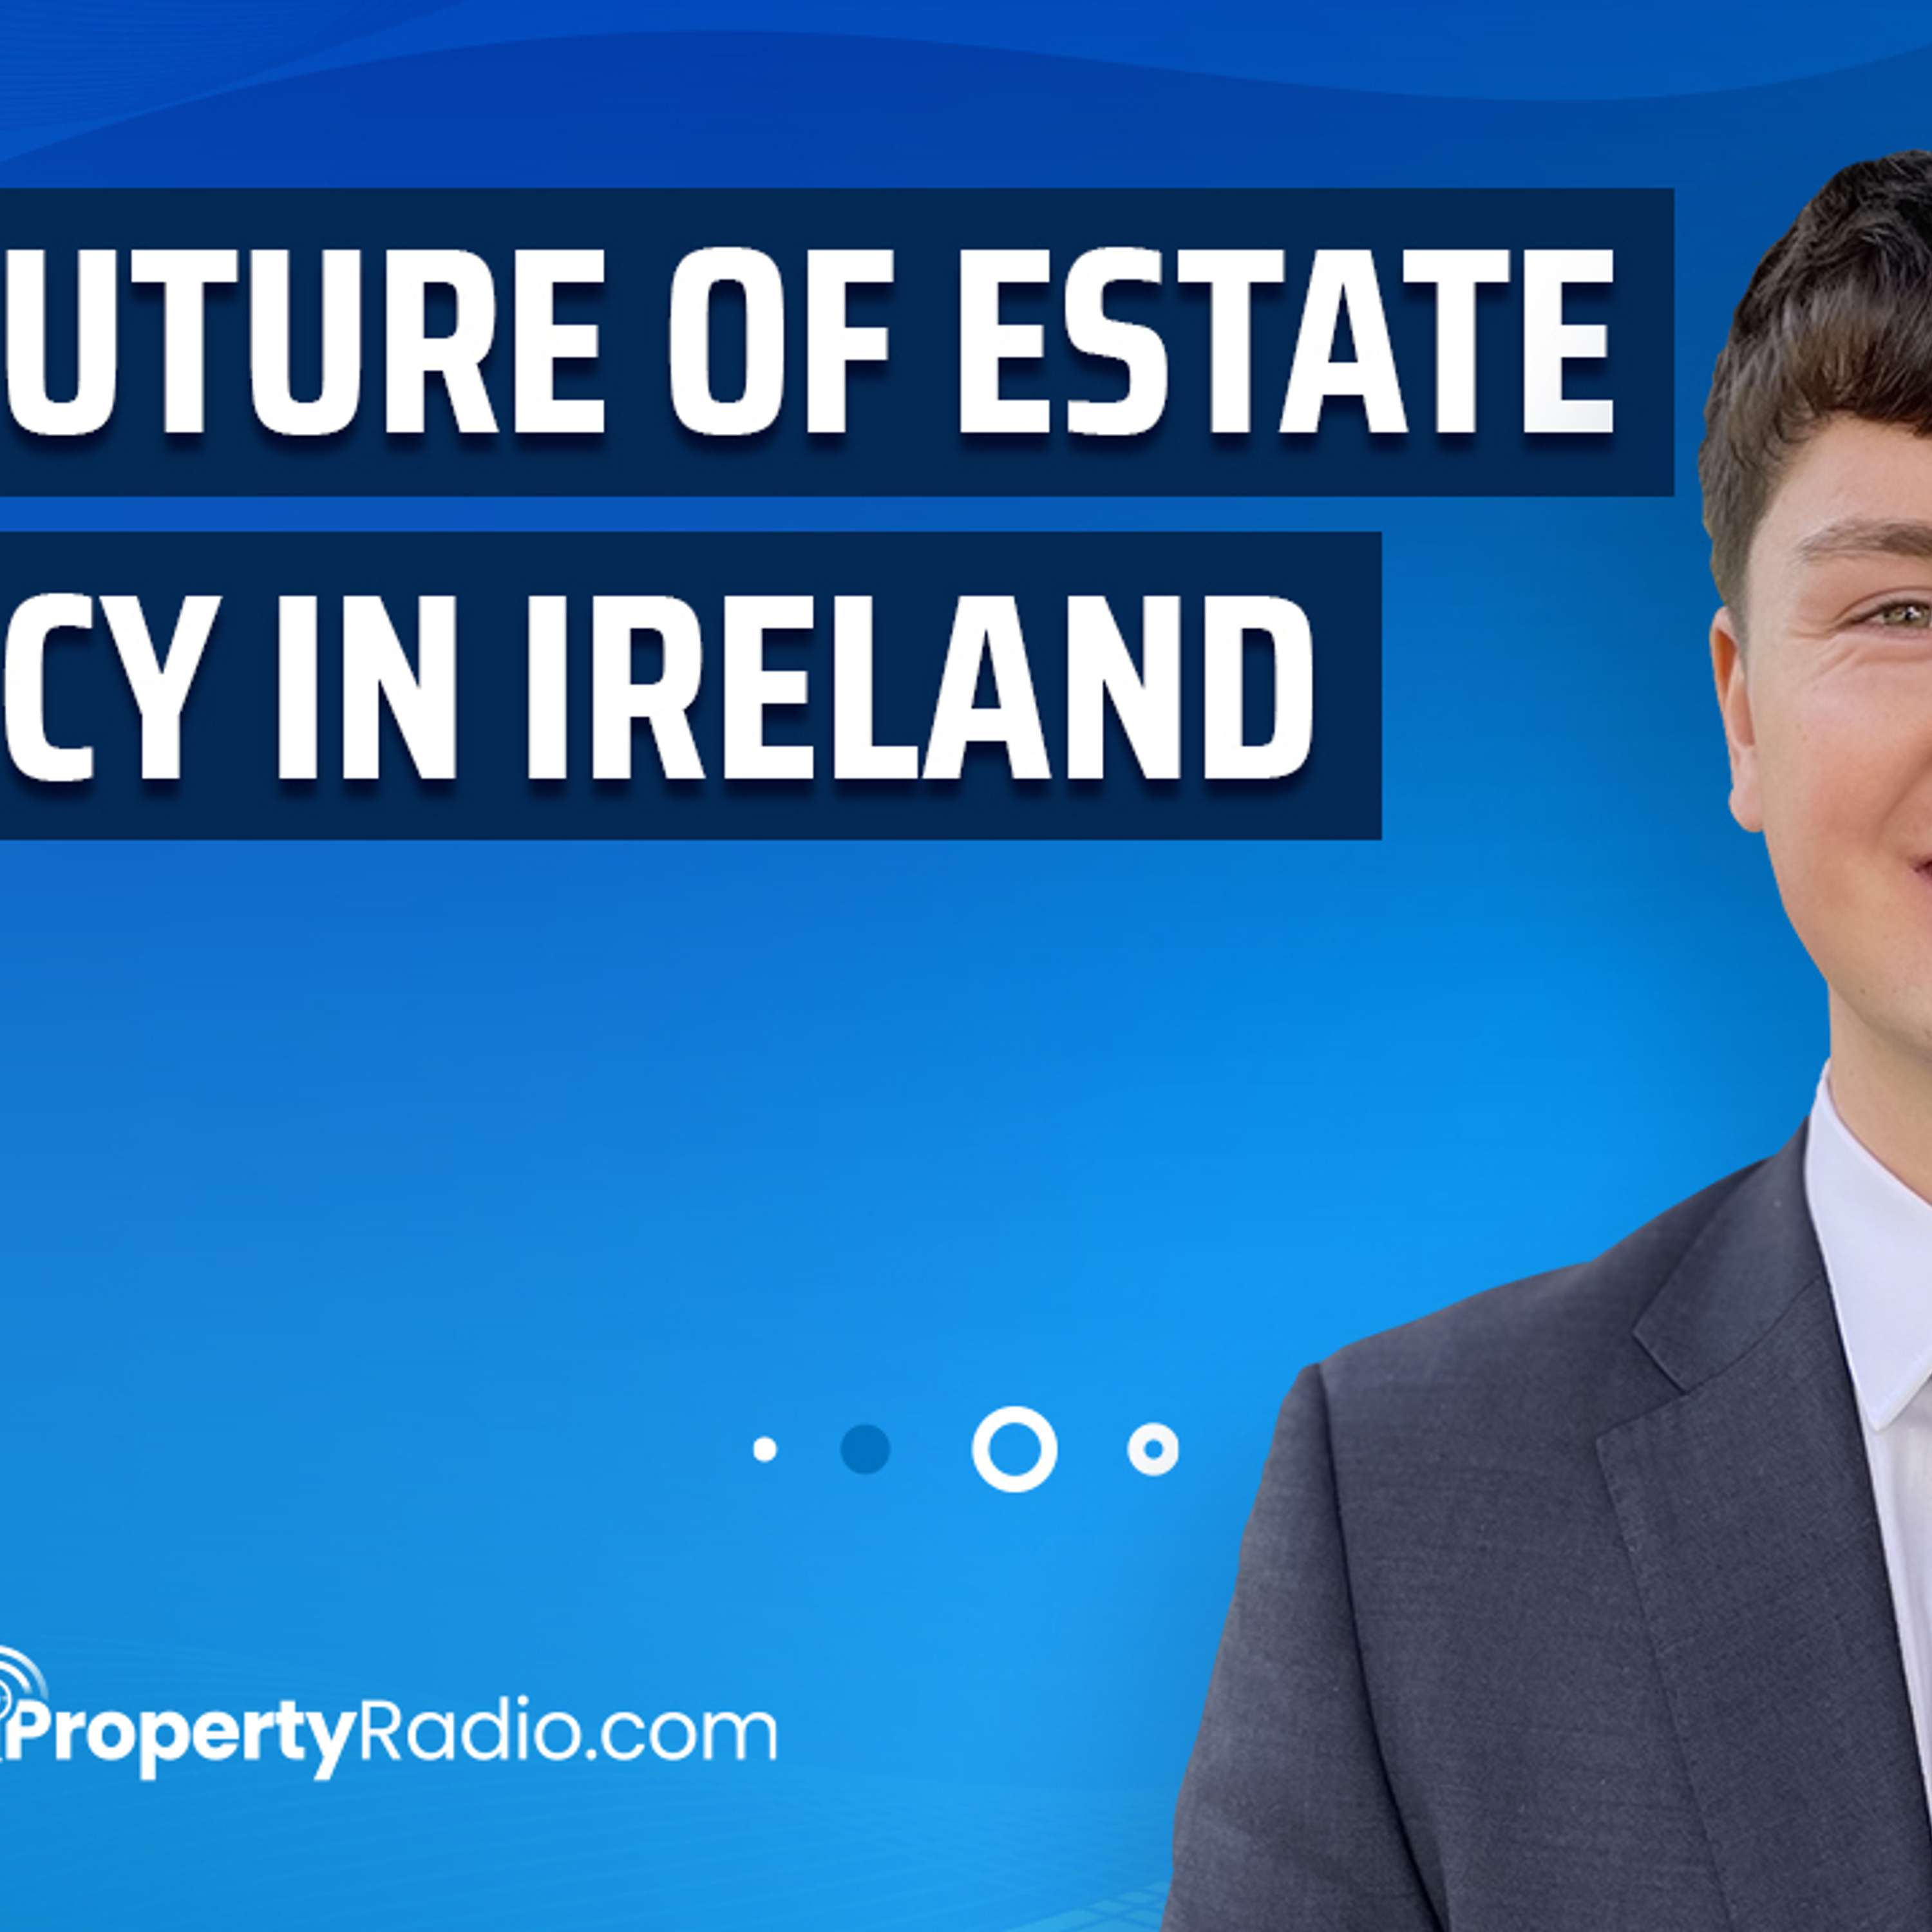 The future of estate agency in Ireland - Hugo Deegan  Newcomer training apprentice with Owen Reilly